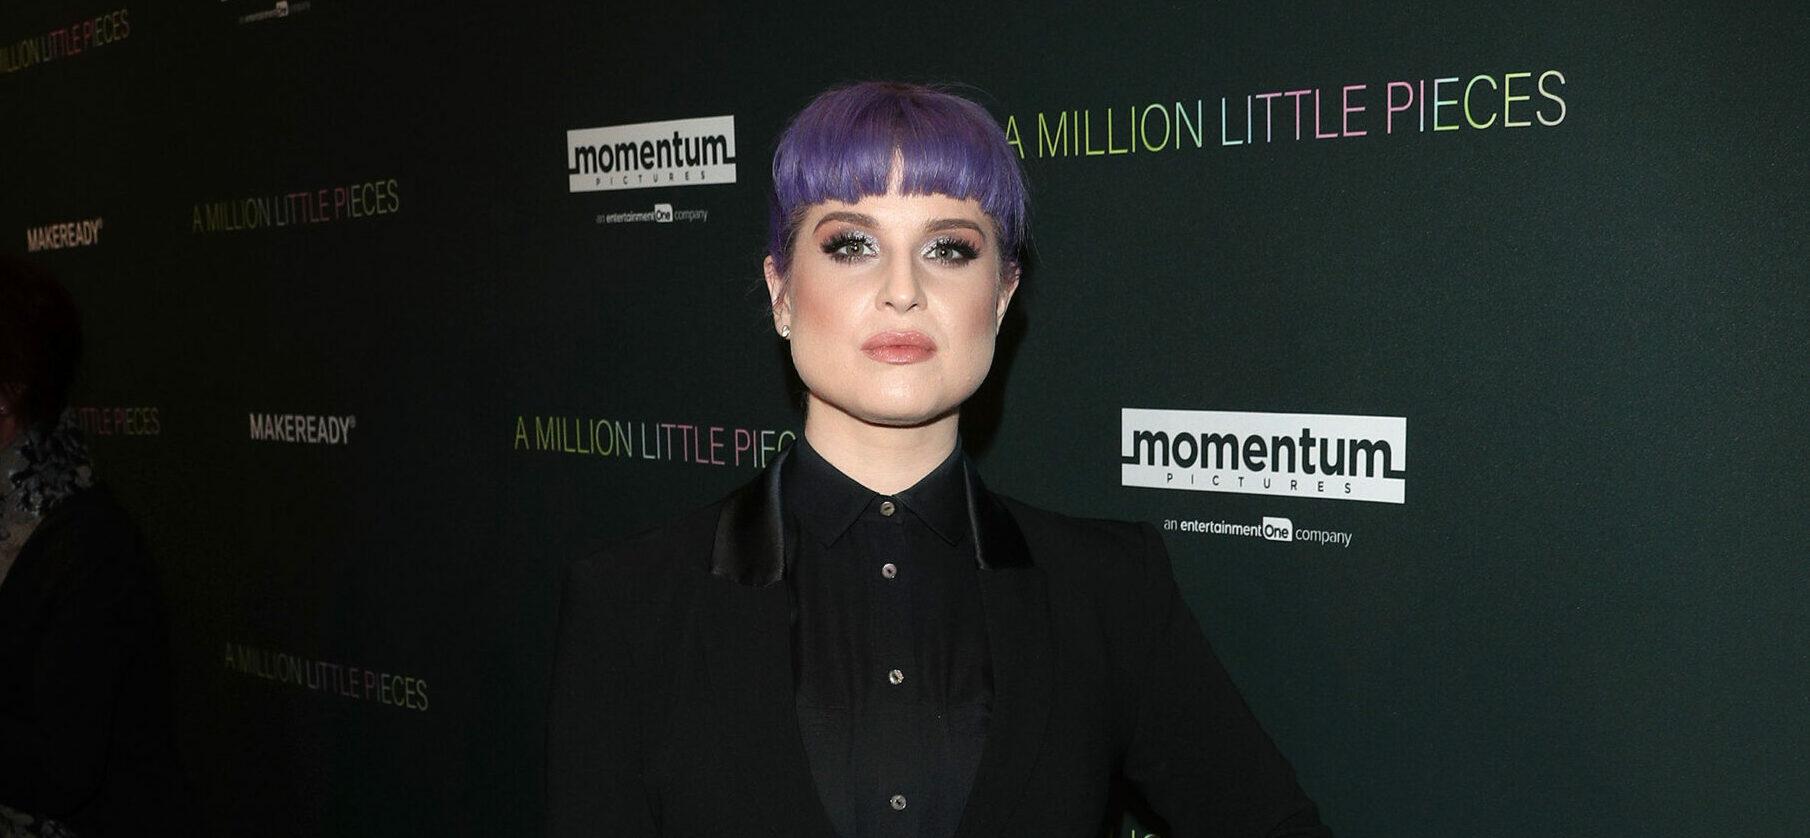 Kelly Osbourne Gets Candid About Going ‘Too Far’ With Postpartum Weight Loss